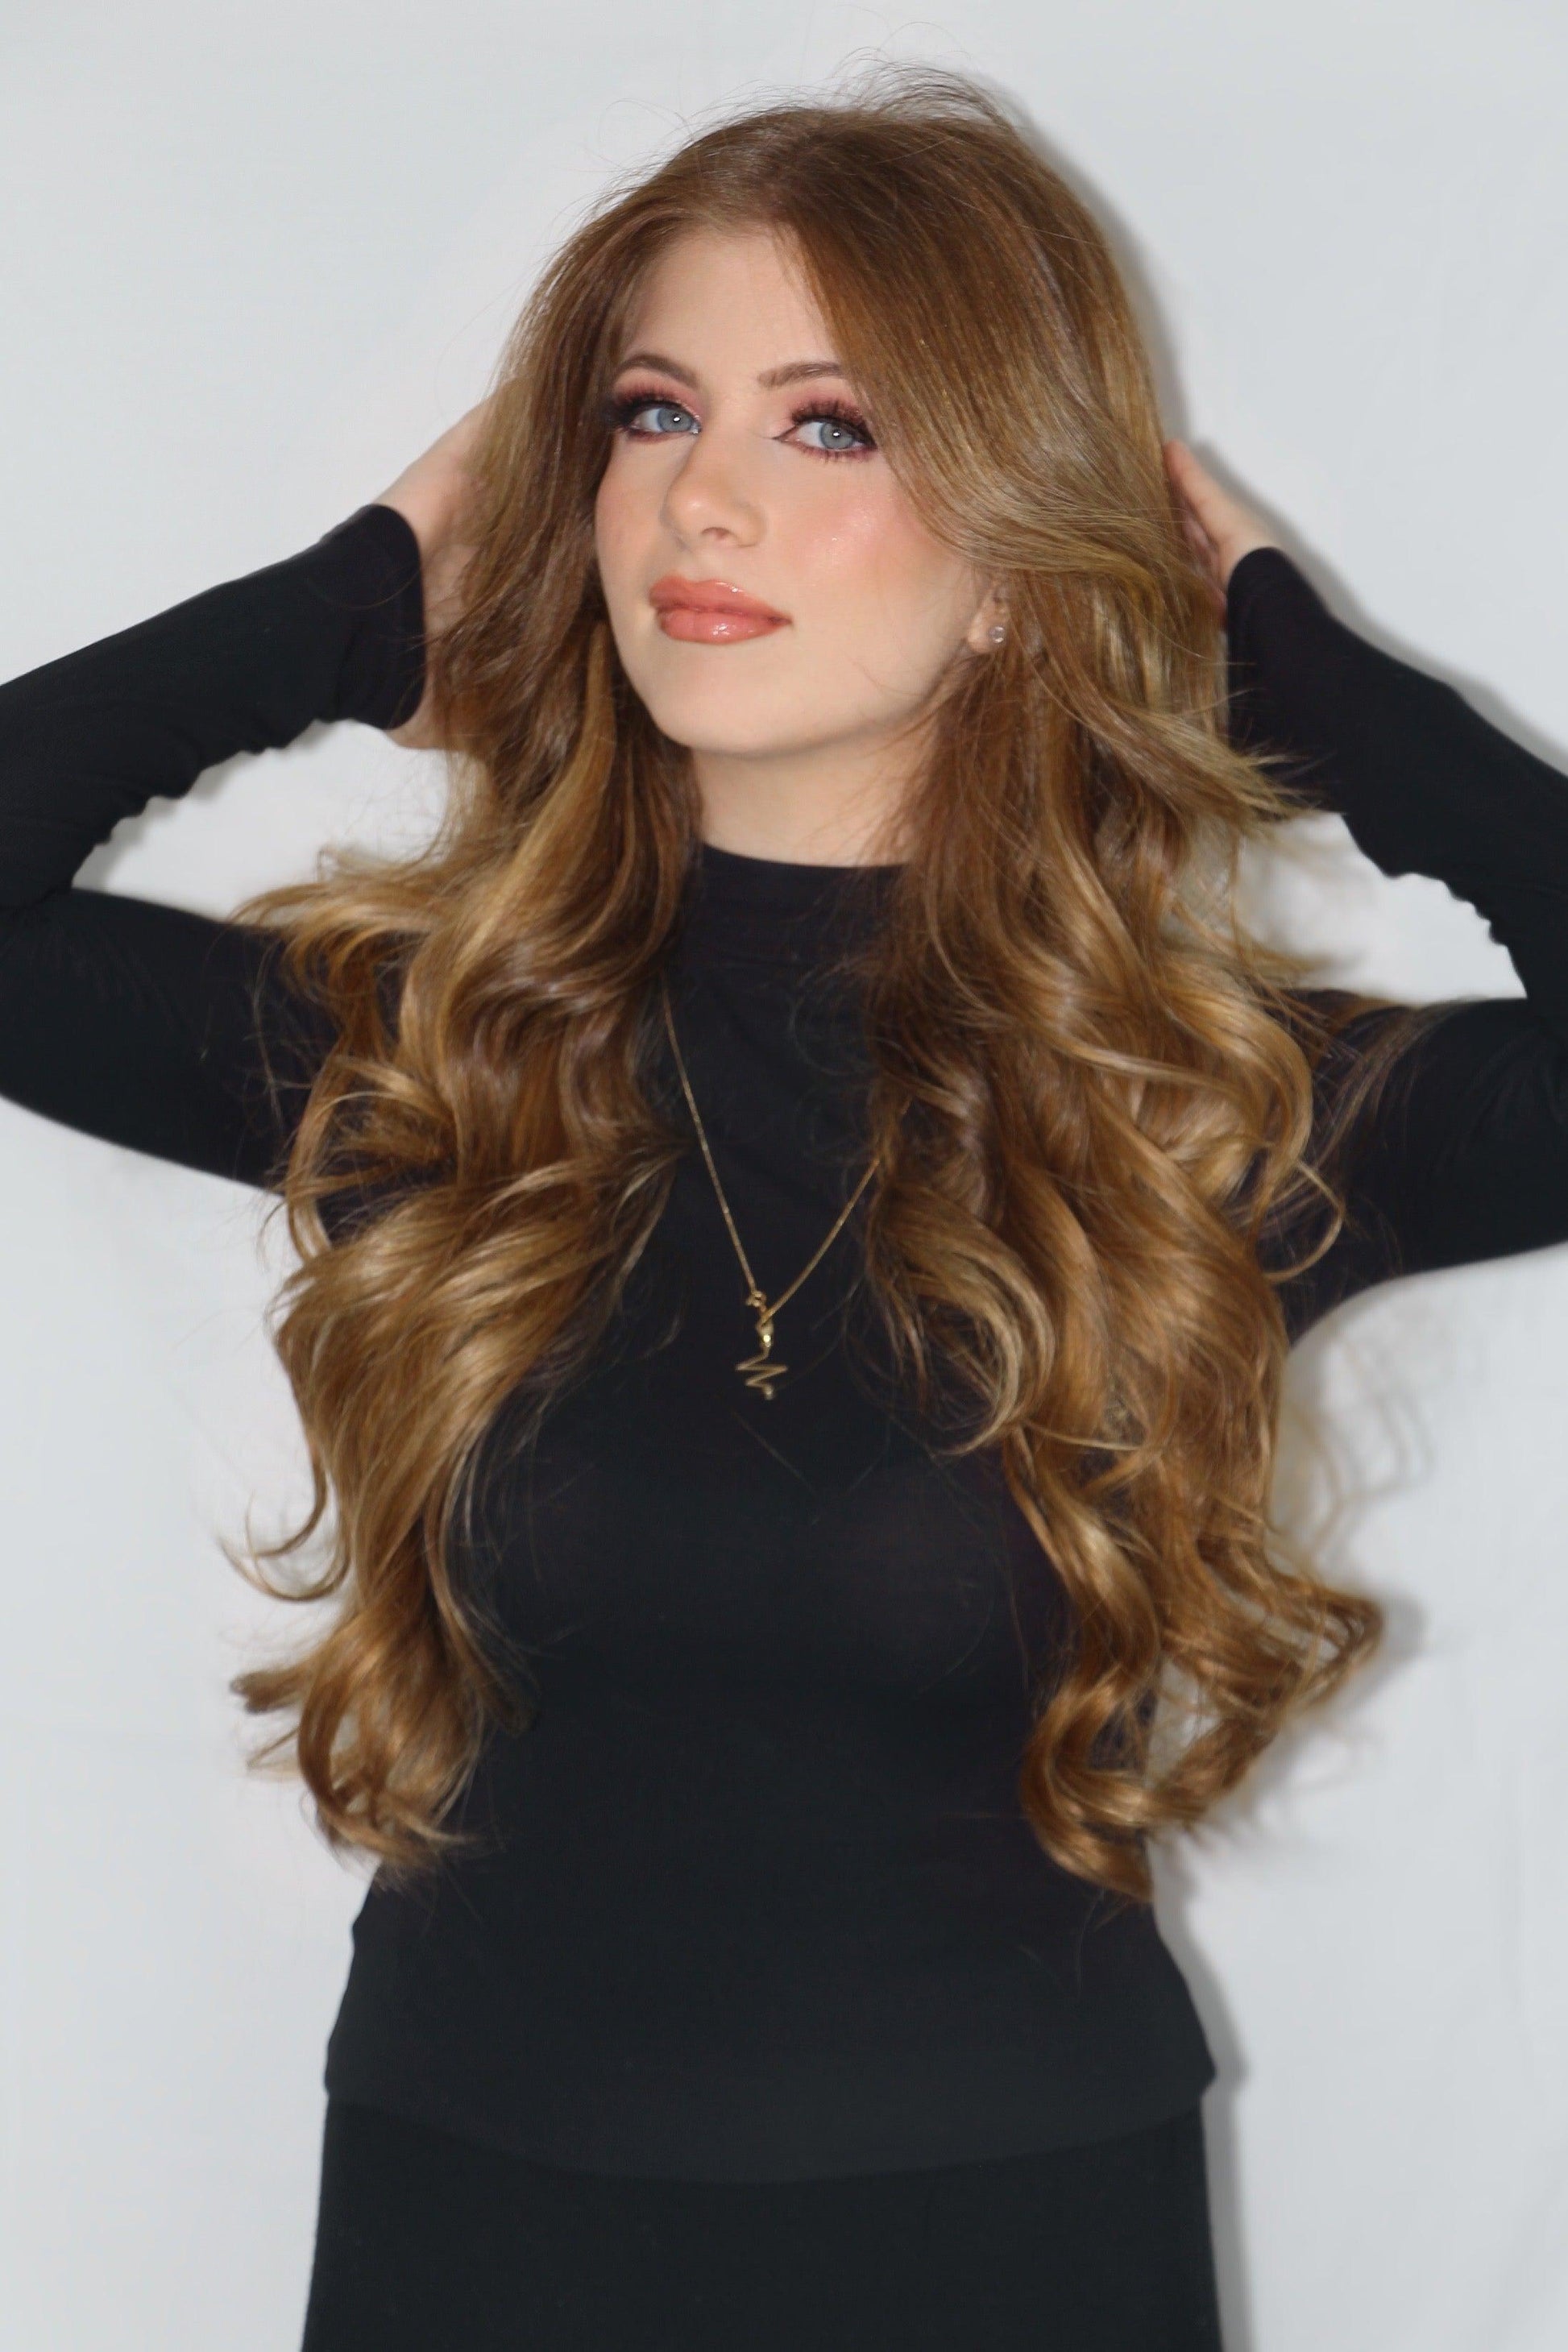 Halo Style Hair Extension - Fortune Wigs